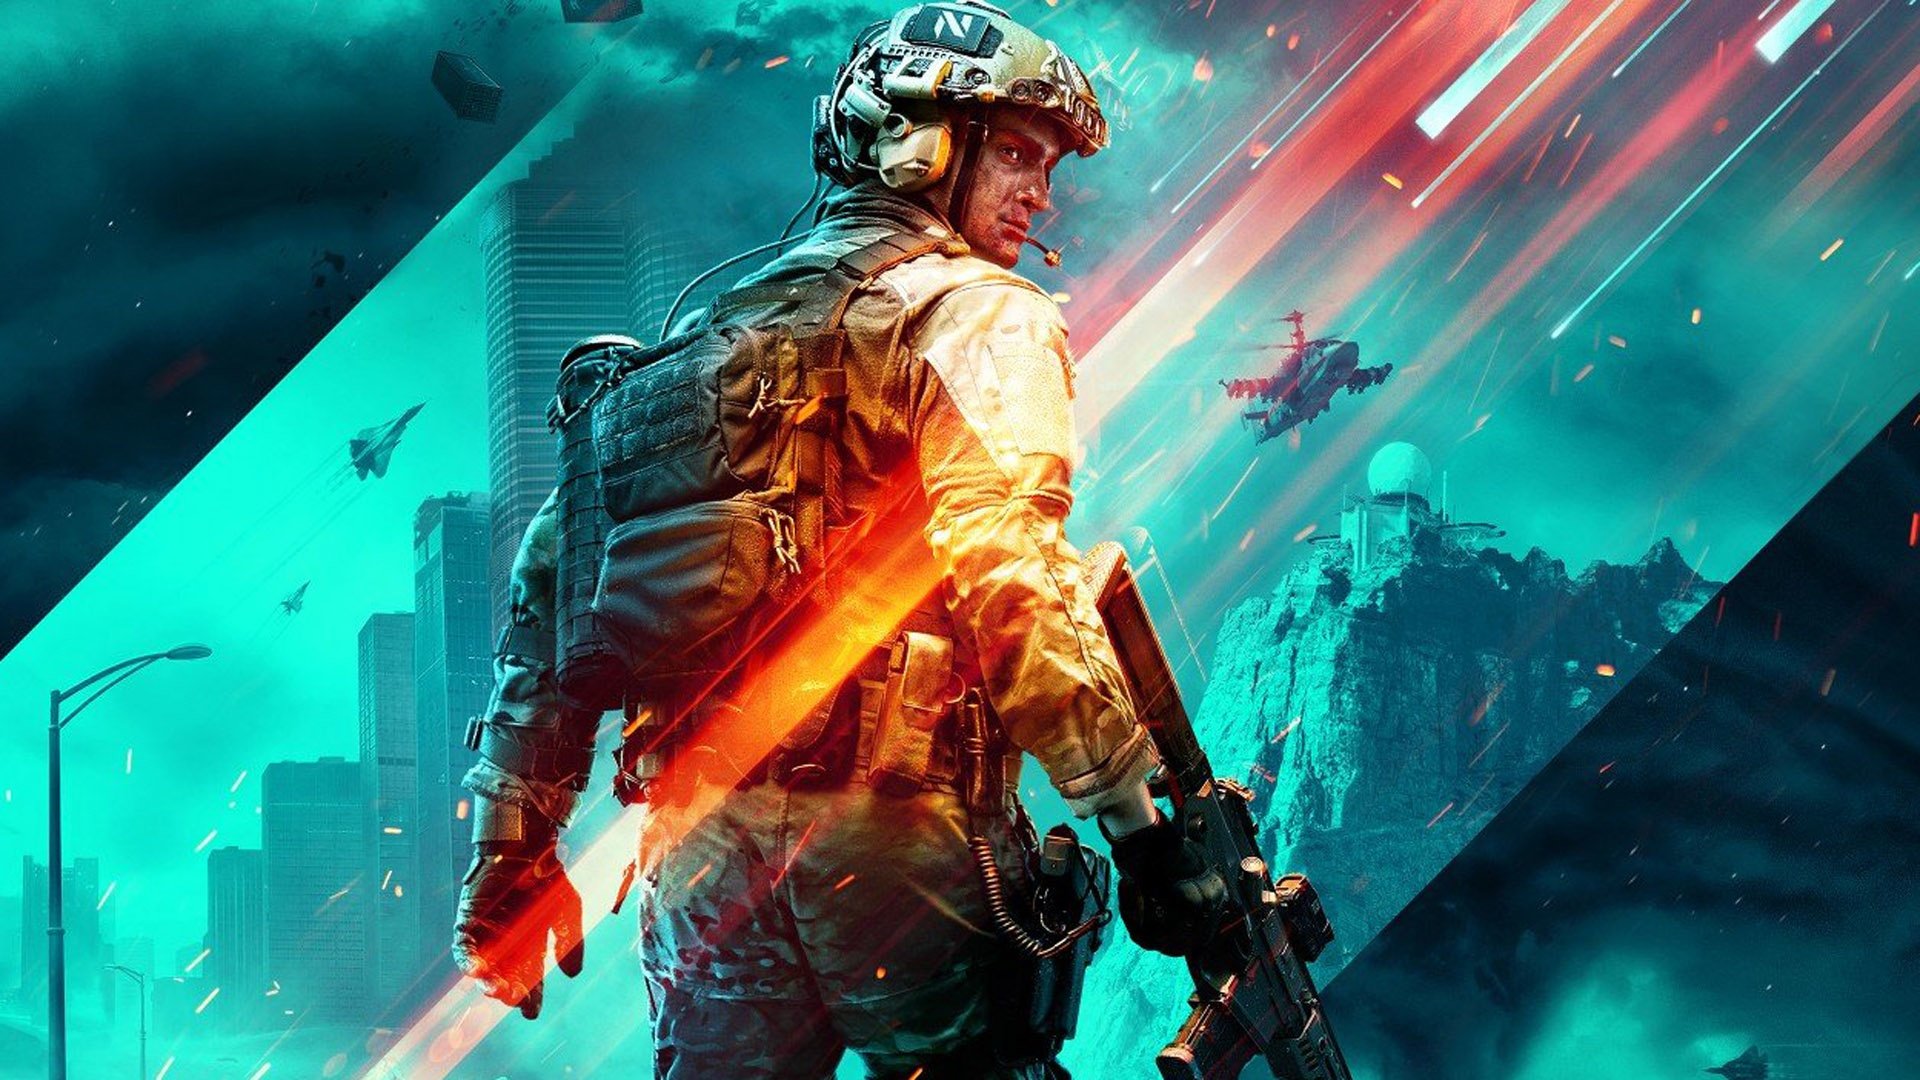 Battlefield 2042 FAQ: All The Questions You Might Have - Answered!